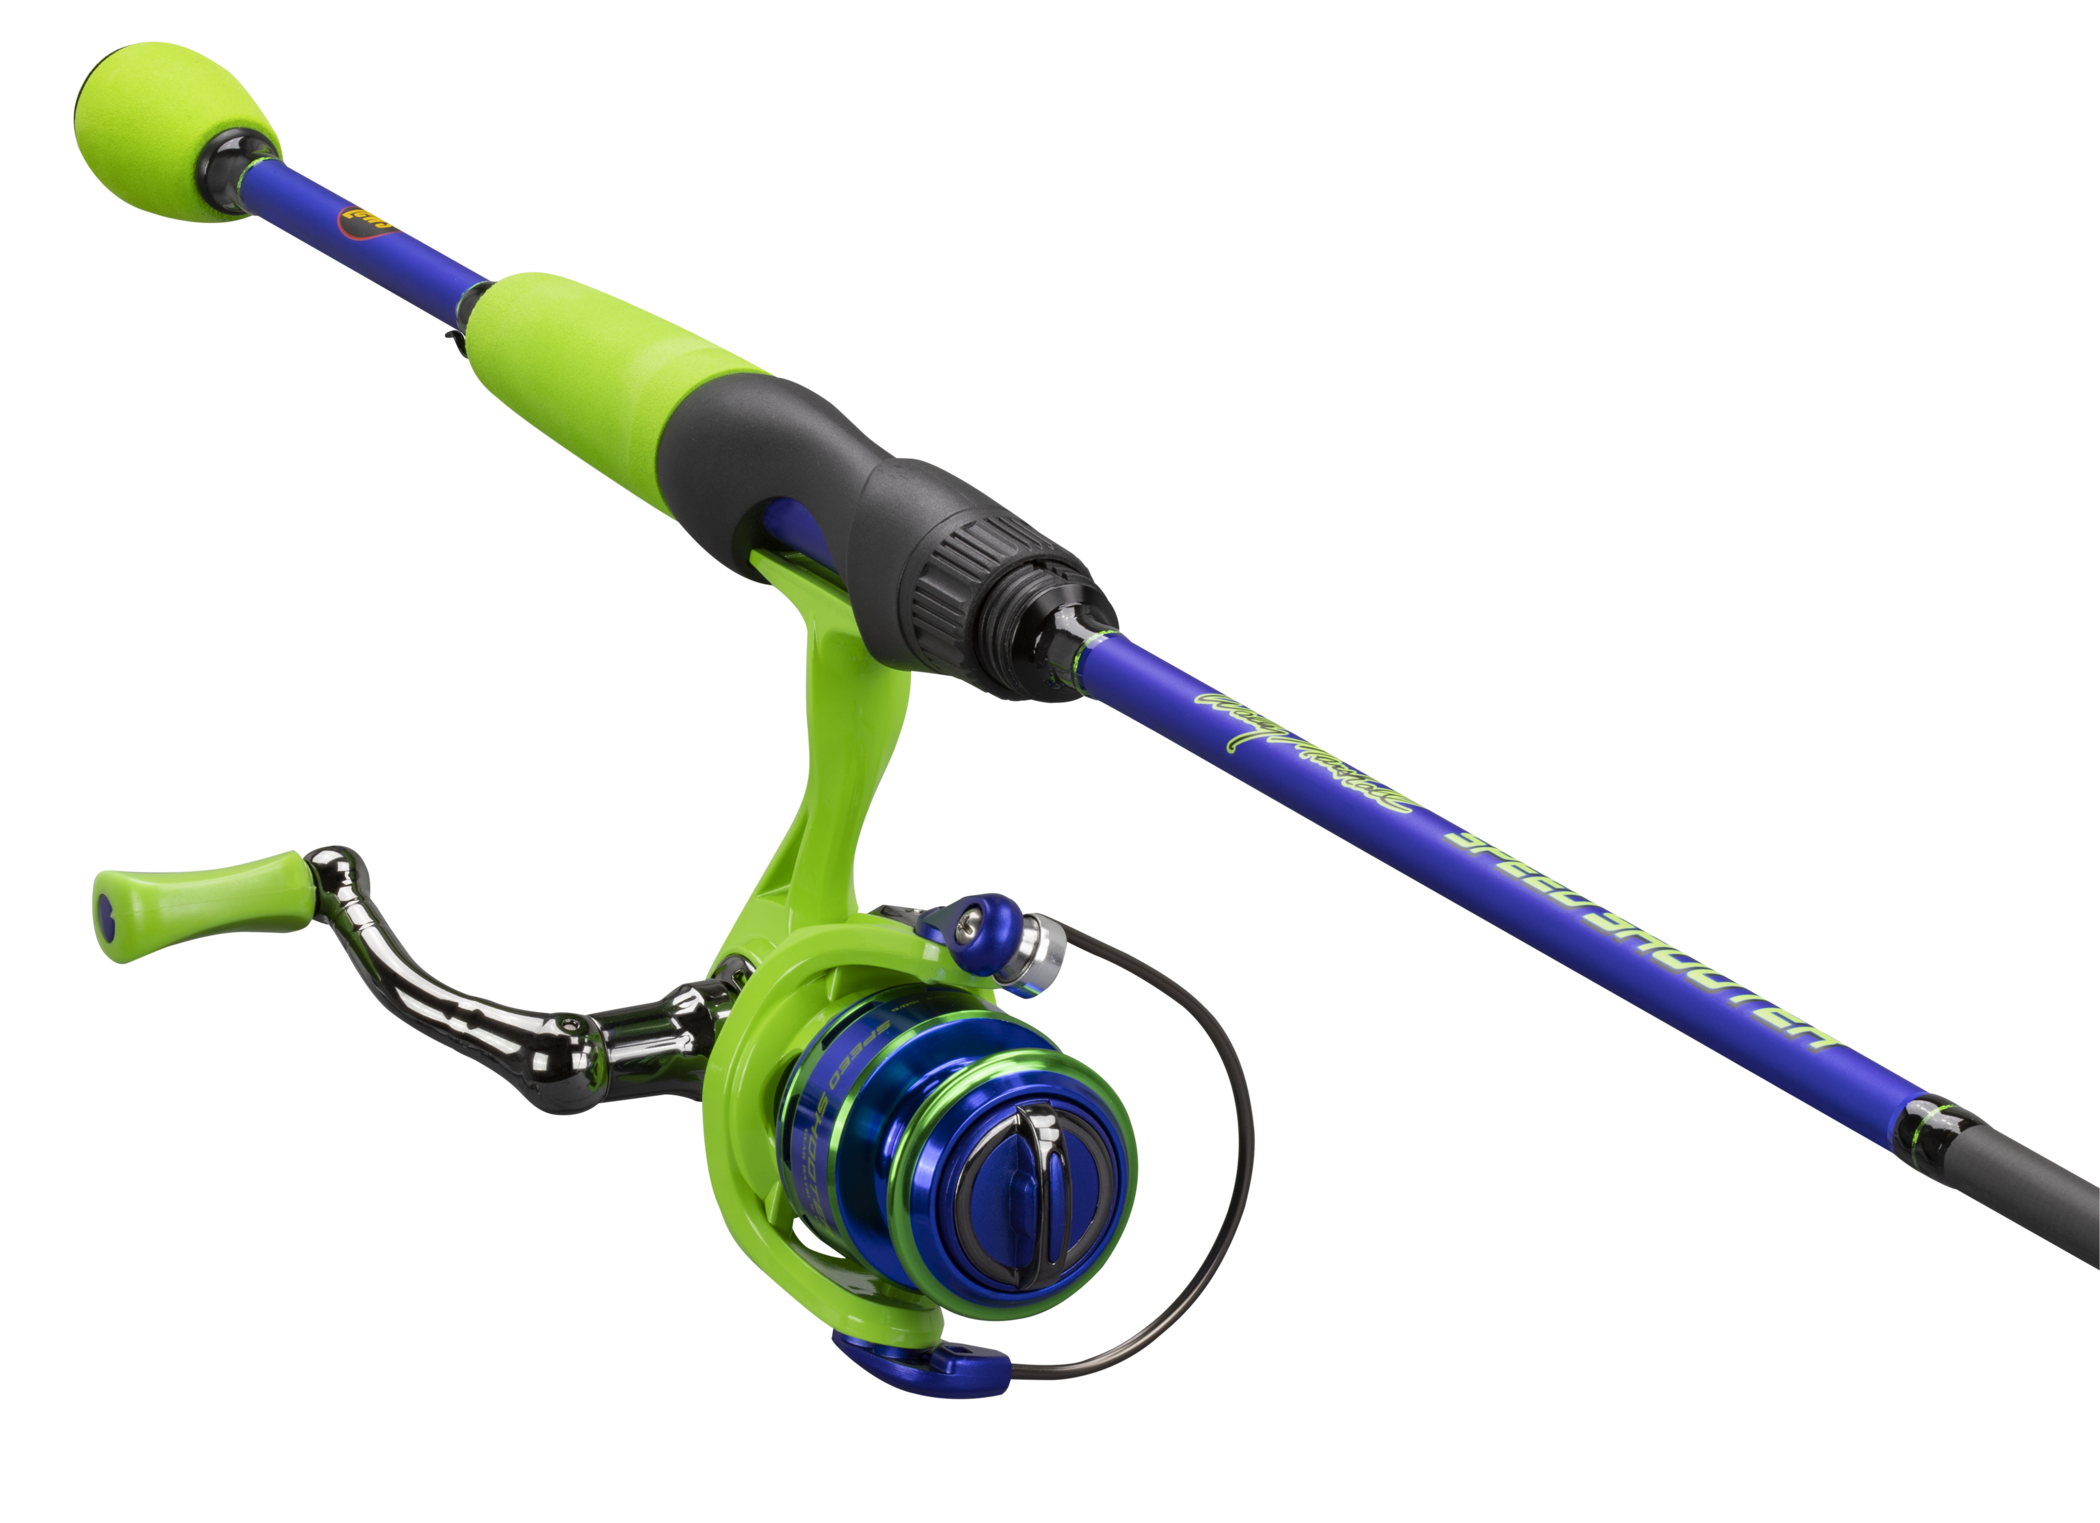 HyperSonic Spinning Combo